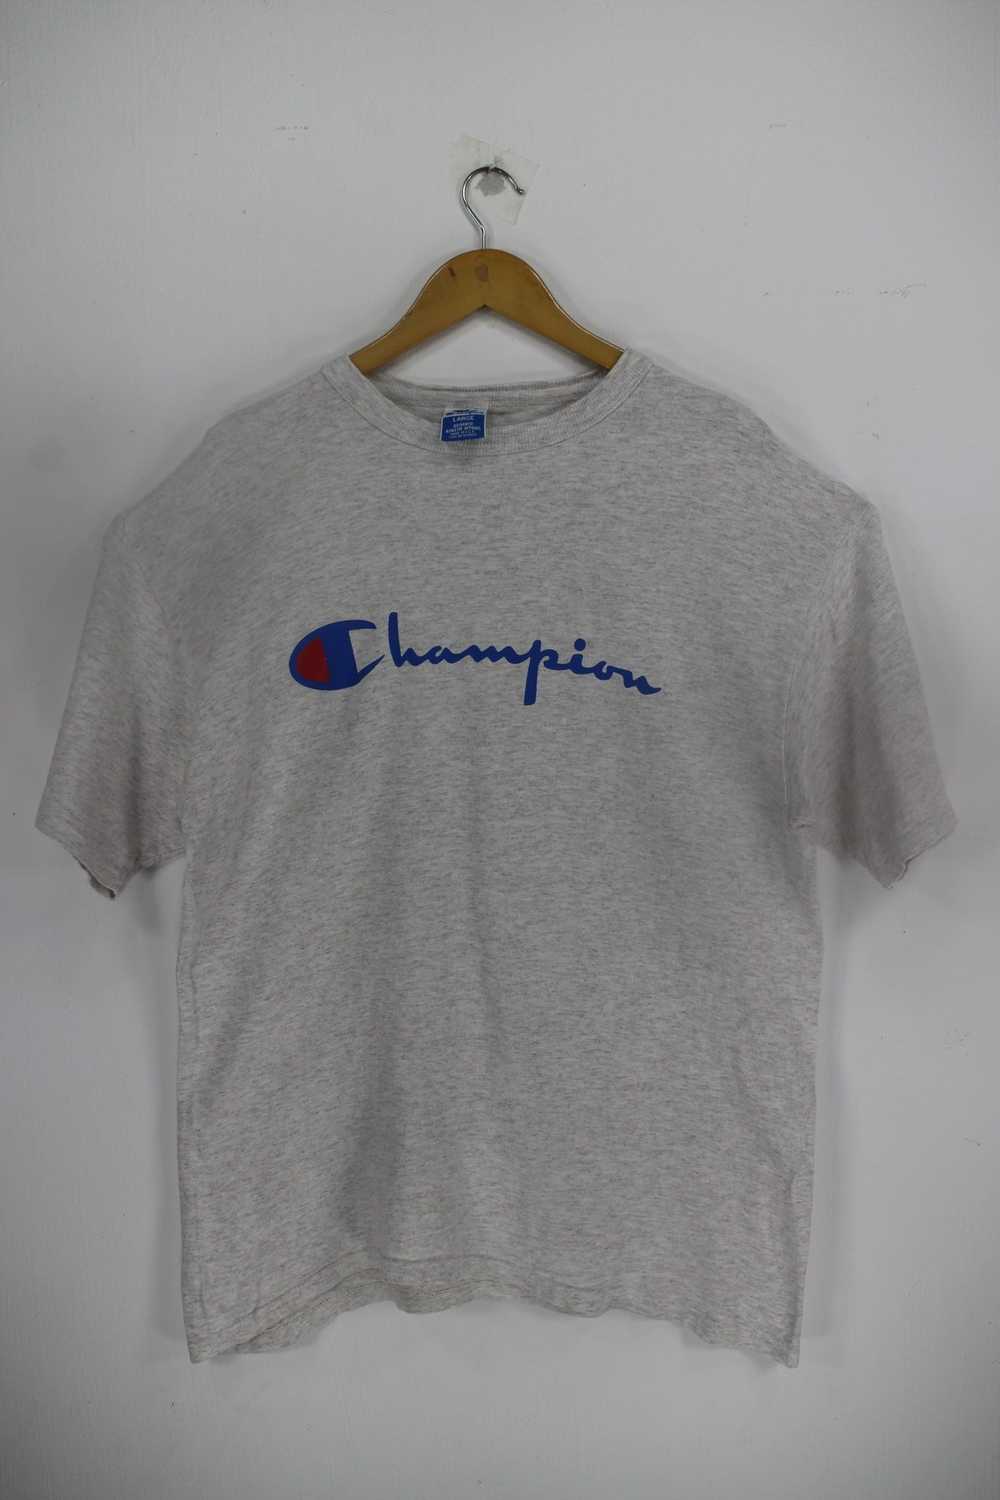 Vintage Champion T Shirt XL Spell Out Logo Big C Label Brand Products 90s  Gray S 